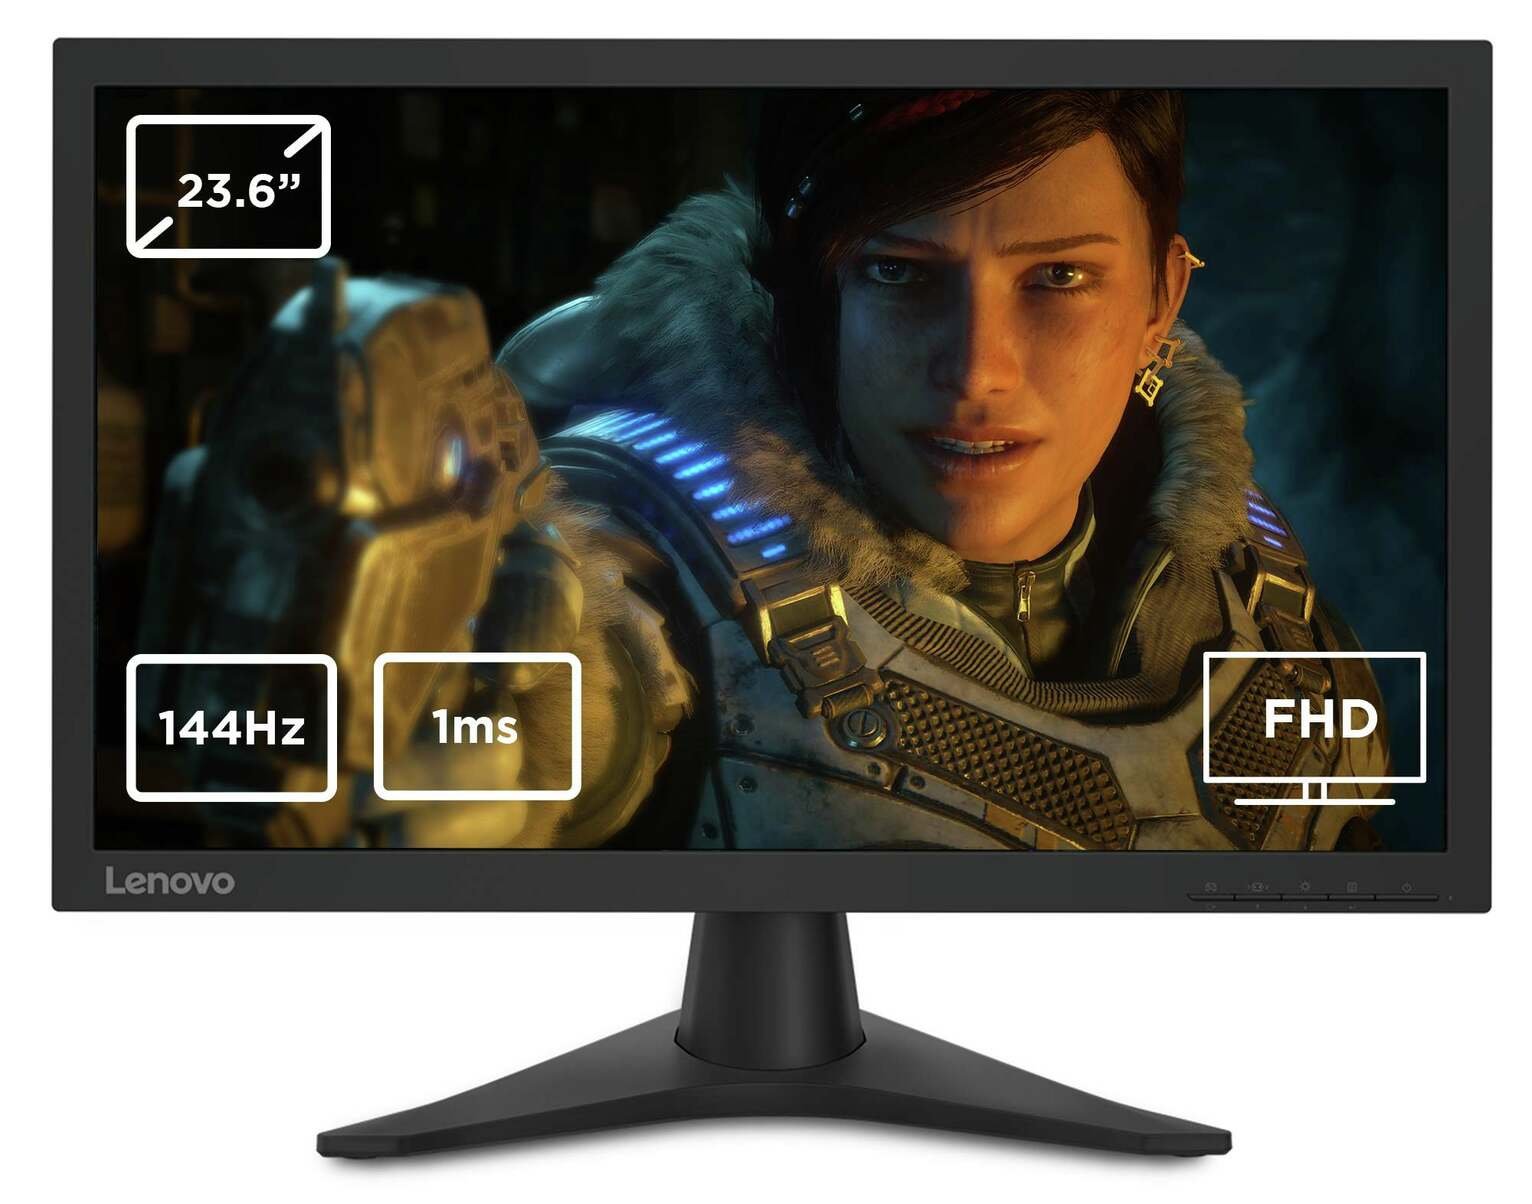 Lenovo G24-10 23.6in 144Hz FHD Monitor Review